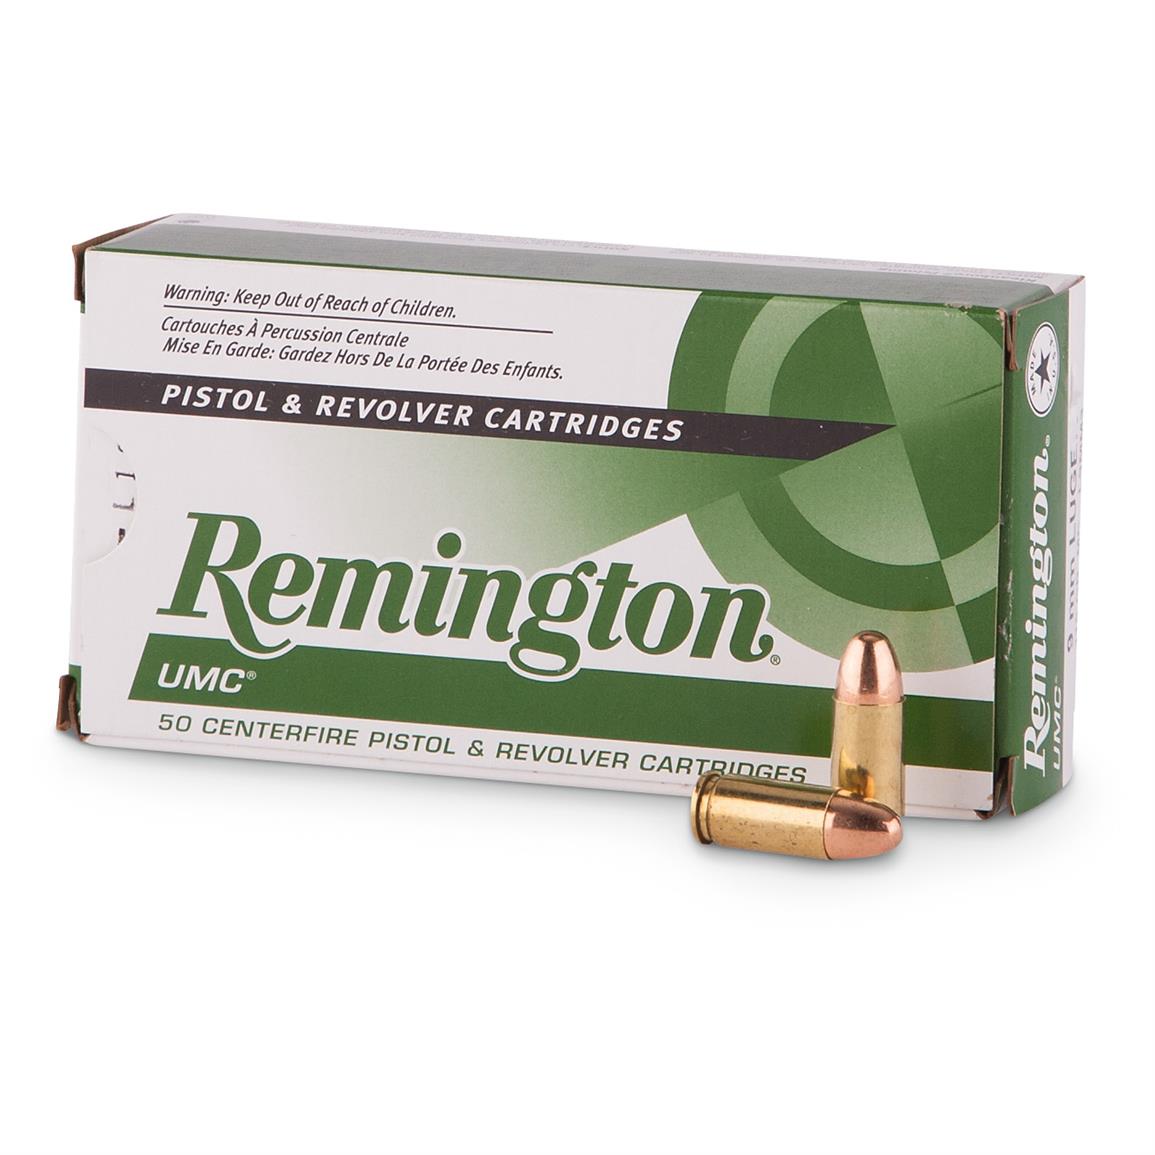 Remington UMC, .380 ACP, MC, 95 Grain, 500 Rounds (Box photoed is for illustrative purposes only, offer is for UMC .380 Auto Ammo)